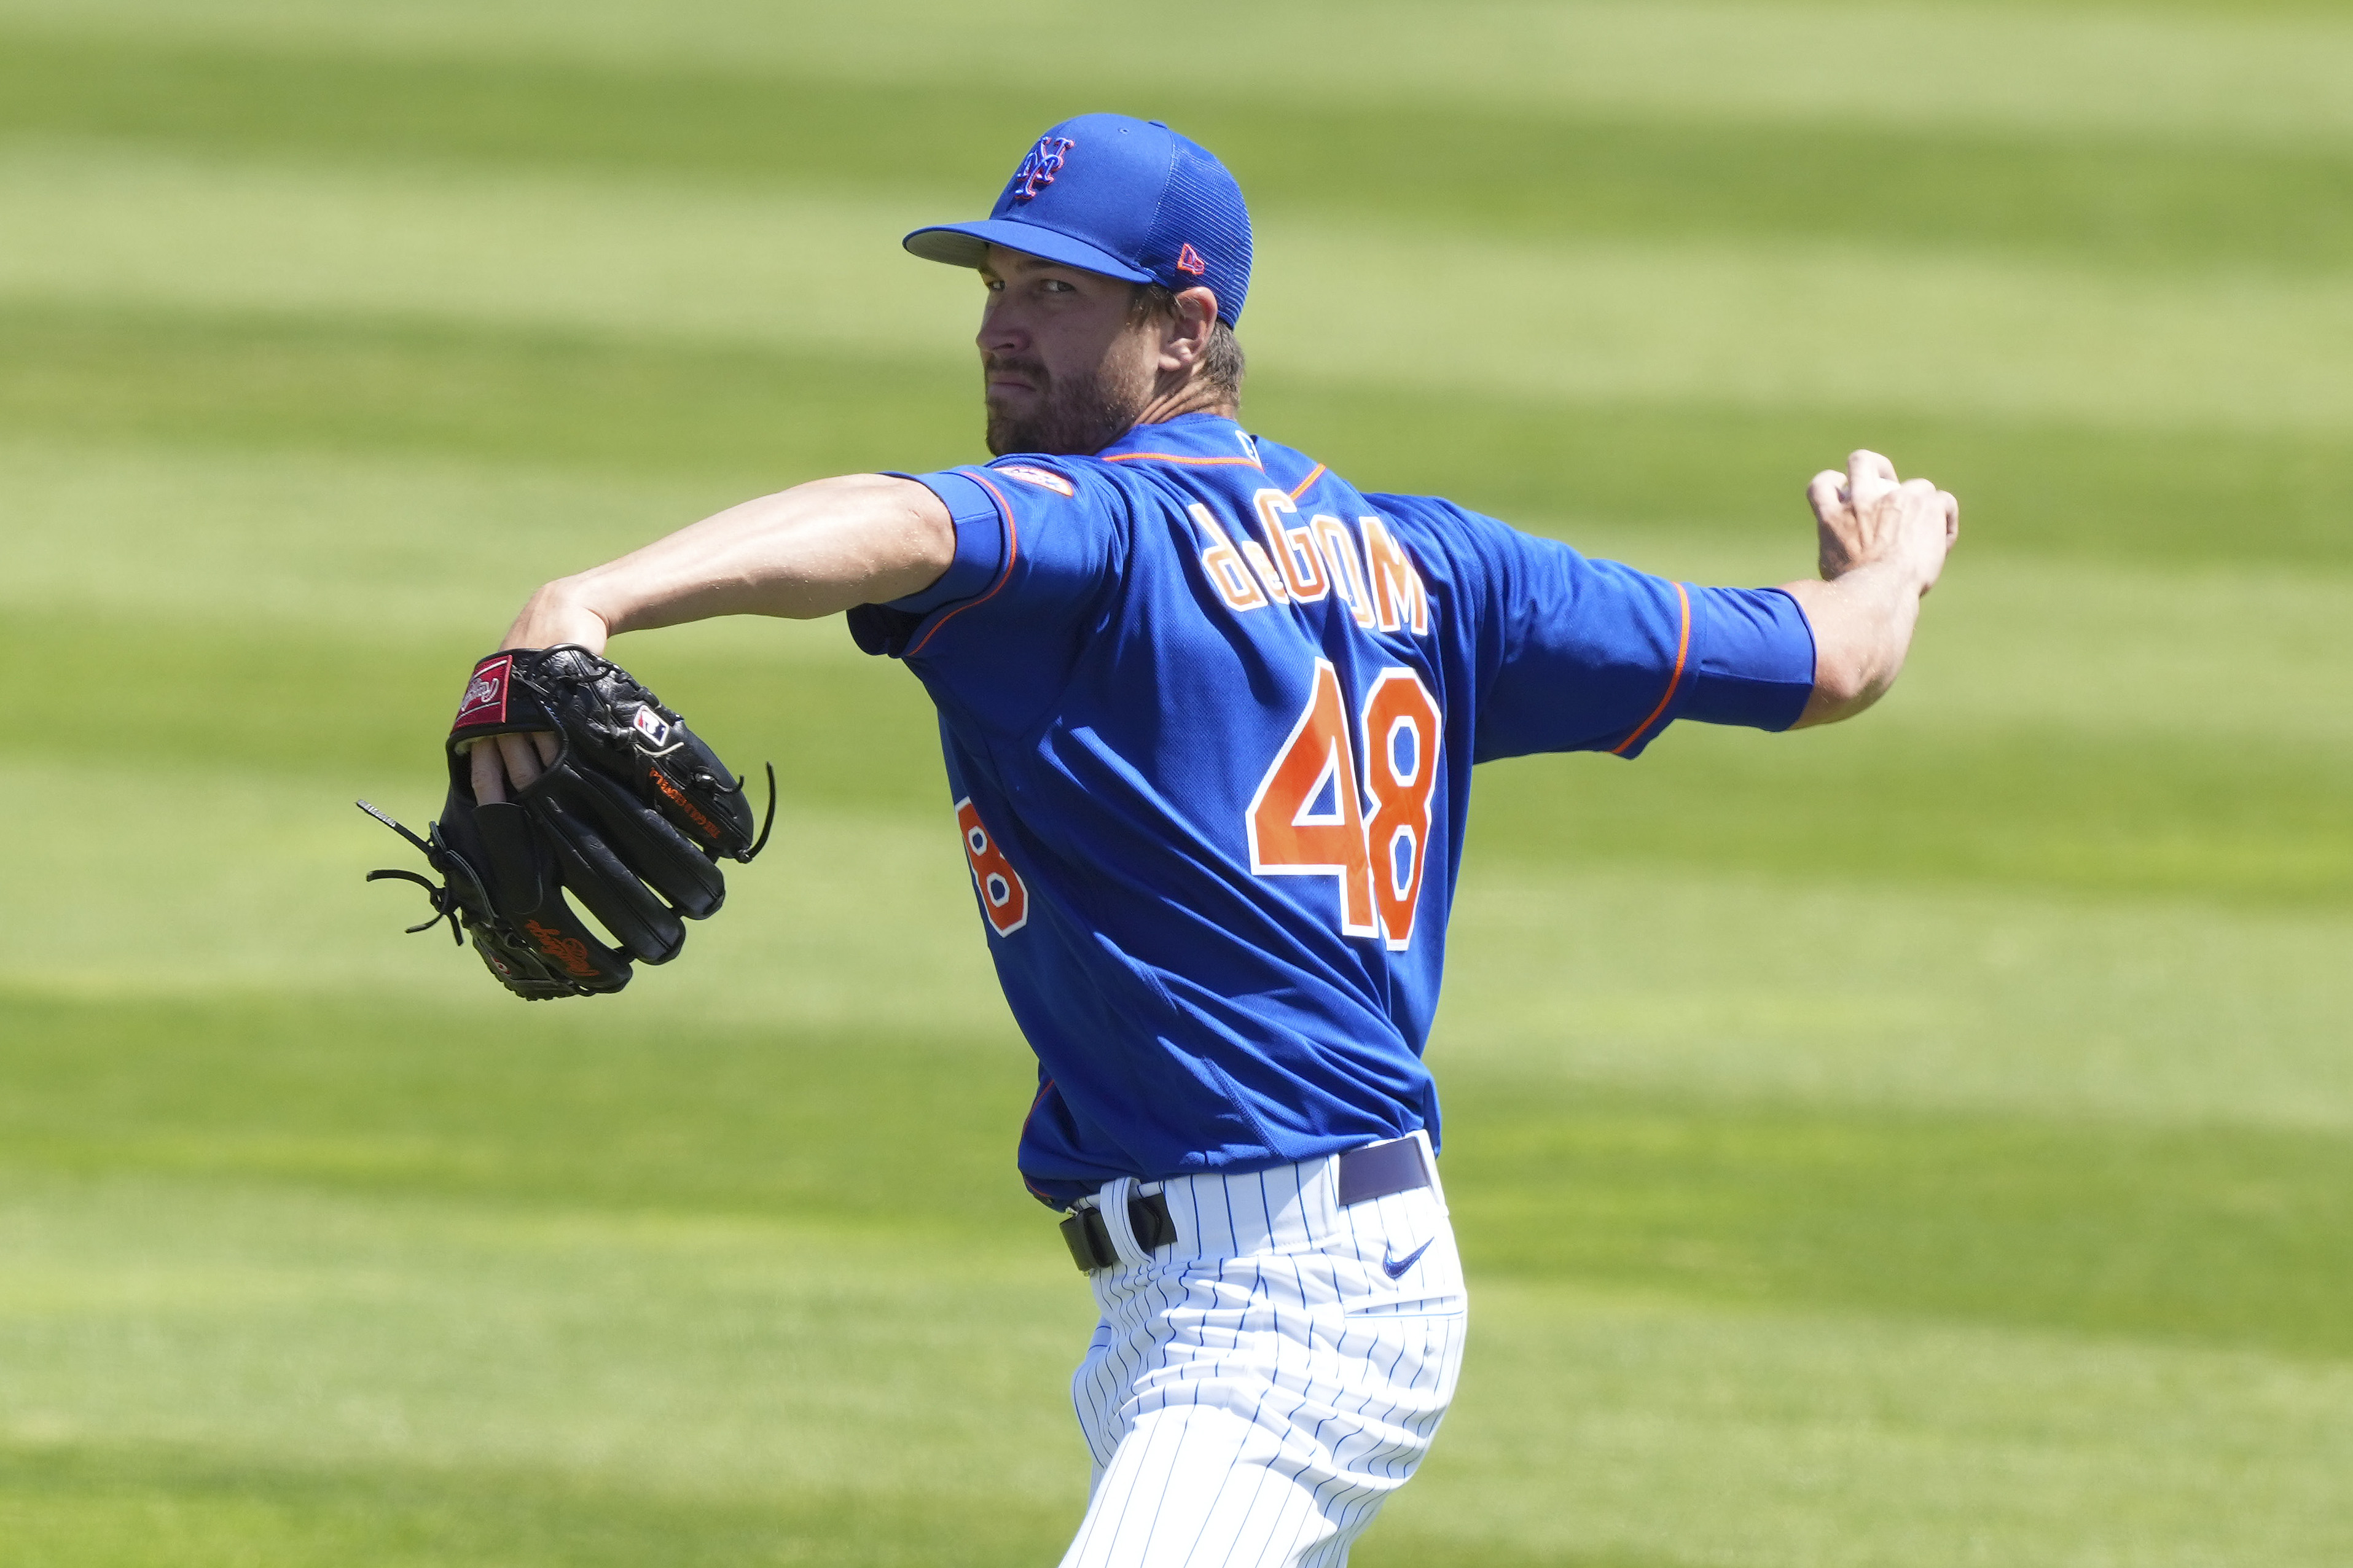 Mets' Jacob deGrom will not pitch again this season